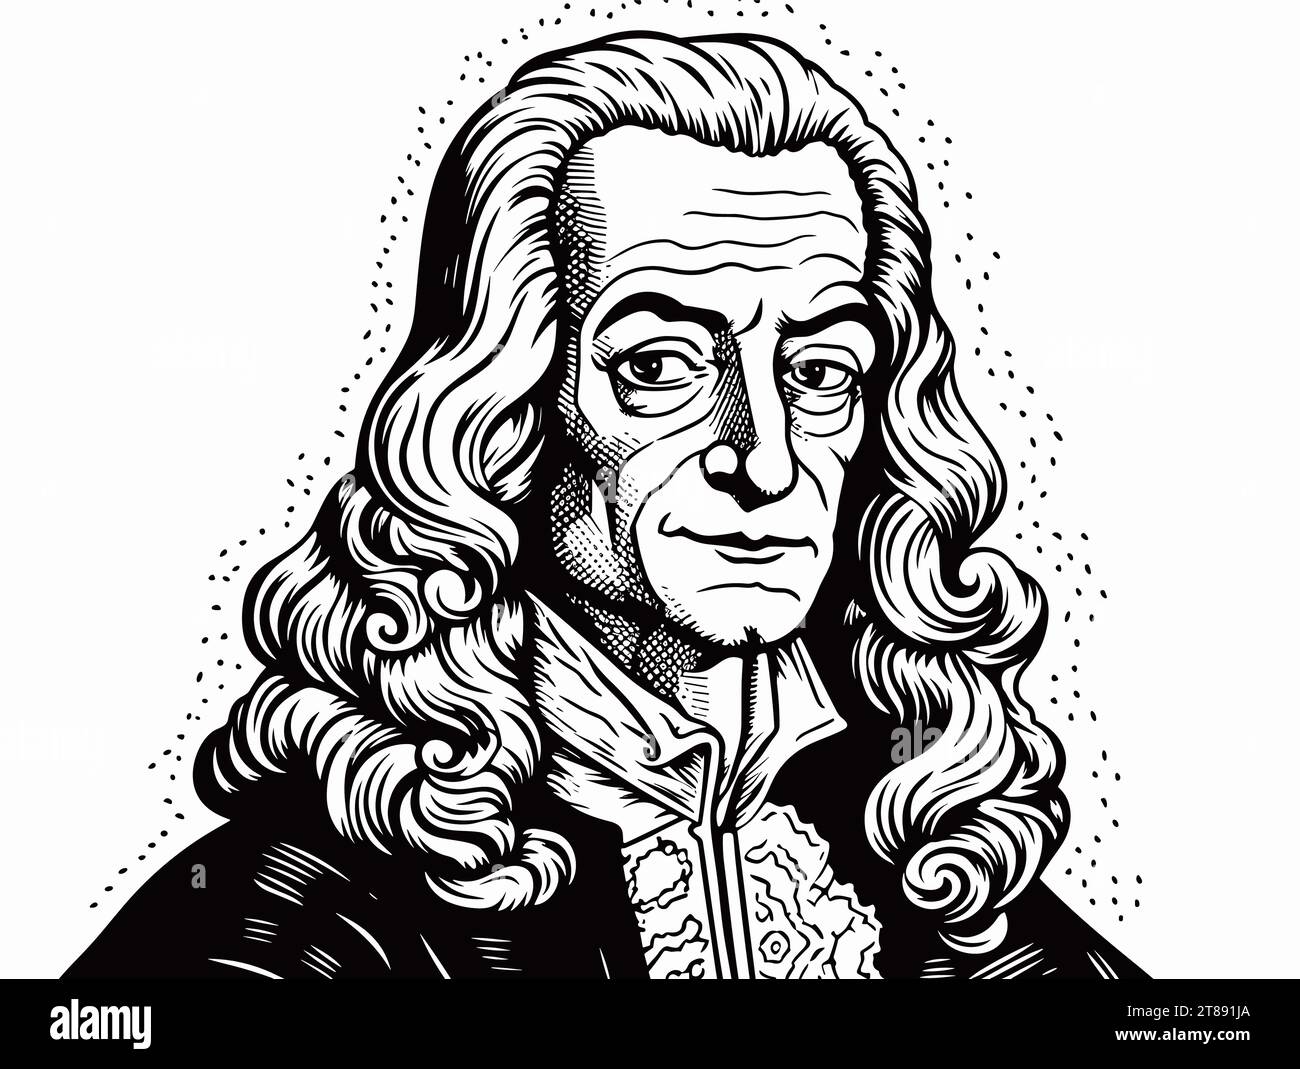 A Black And White Drawing Of A Man With Long Curly Hair - Voltaire ...